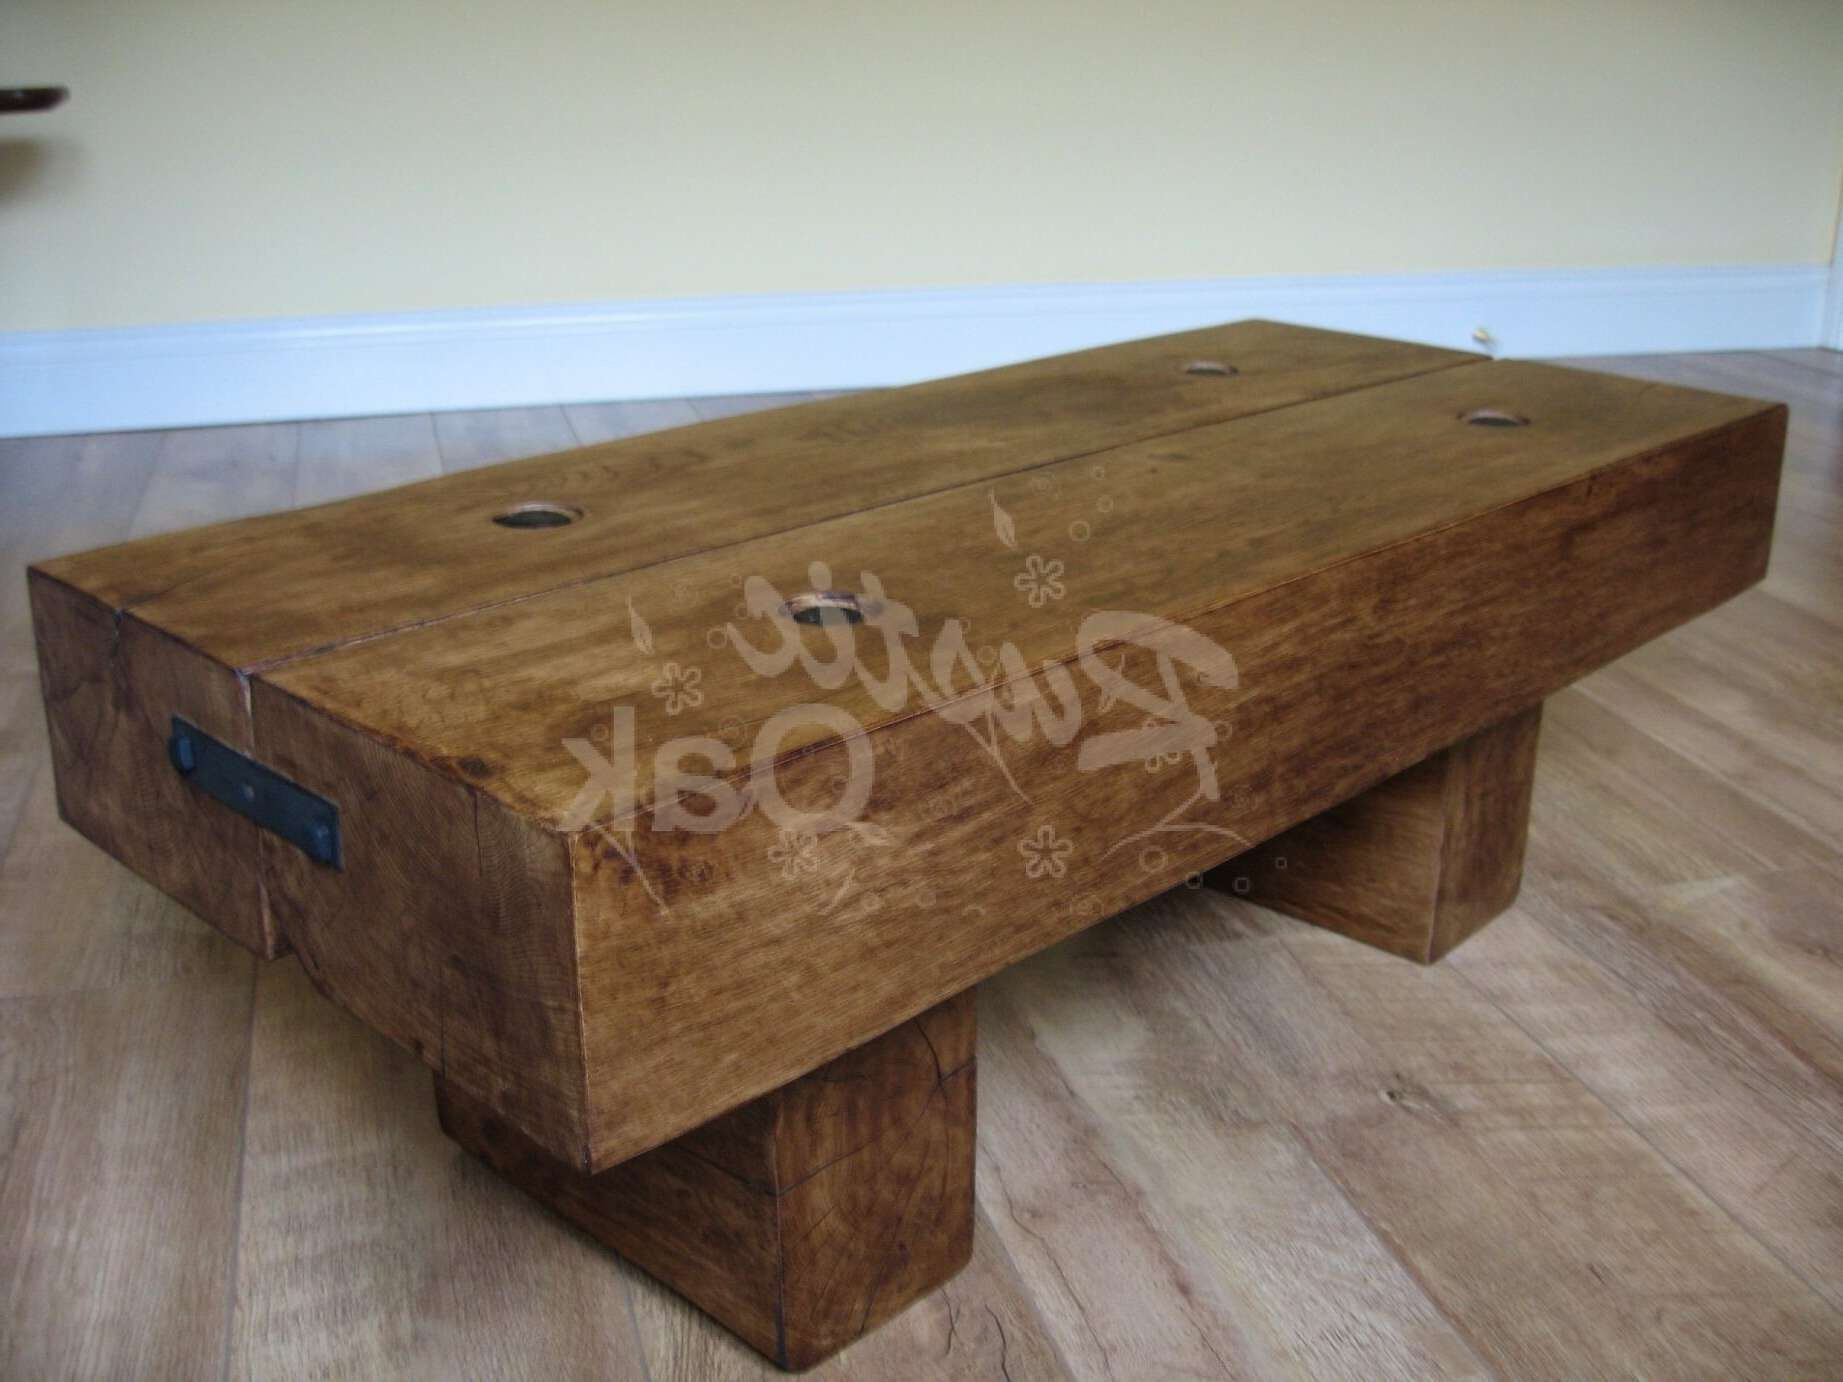 2 Beam Coffee Table With Rustic Bolts – Rustic Oak Within Well Known Oak Beam Coffee Tables (View 1 of 20)